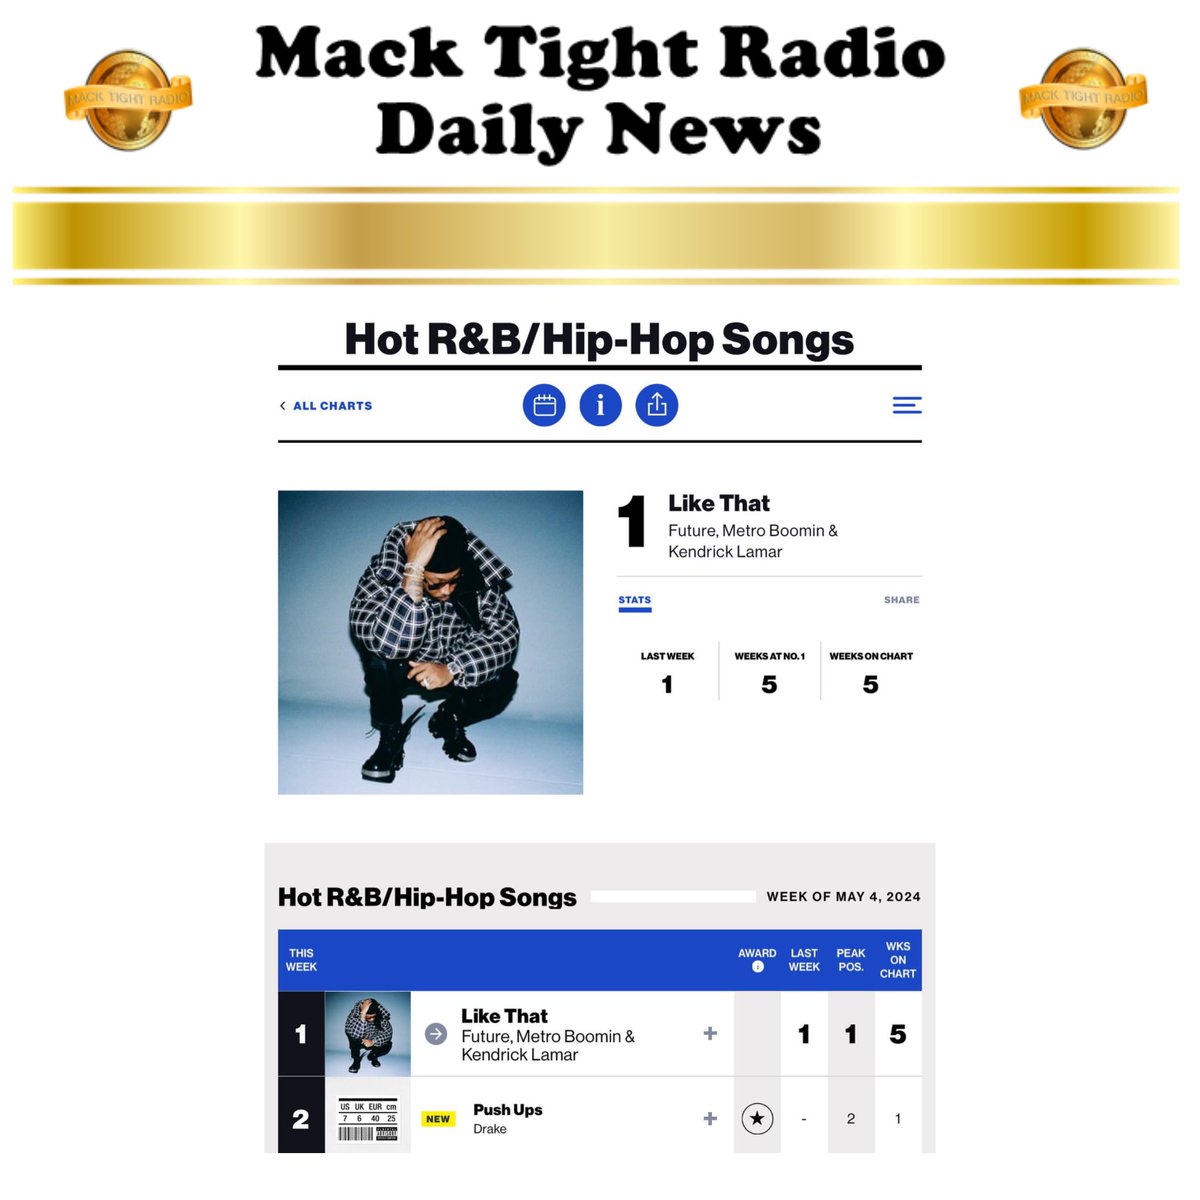 #Billboard reports that #Drake’s #PushUps debuted at #2 on the #RandB ❌ #HipHop chart ❌ is the top streamed song in the genre for the week 👀 - #MackTightRadio 📻 #Ready2LearnShow 🧐 [Watch #MackTightTV On #RokuTV ❌ #FireTV On Channel #MackTight ❌ LISTEN TO Mack Tight Radio…